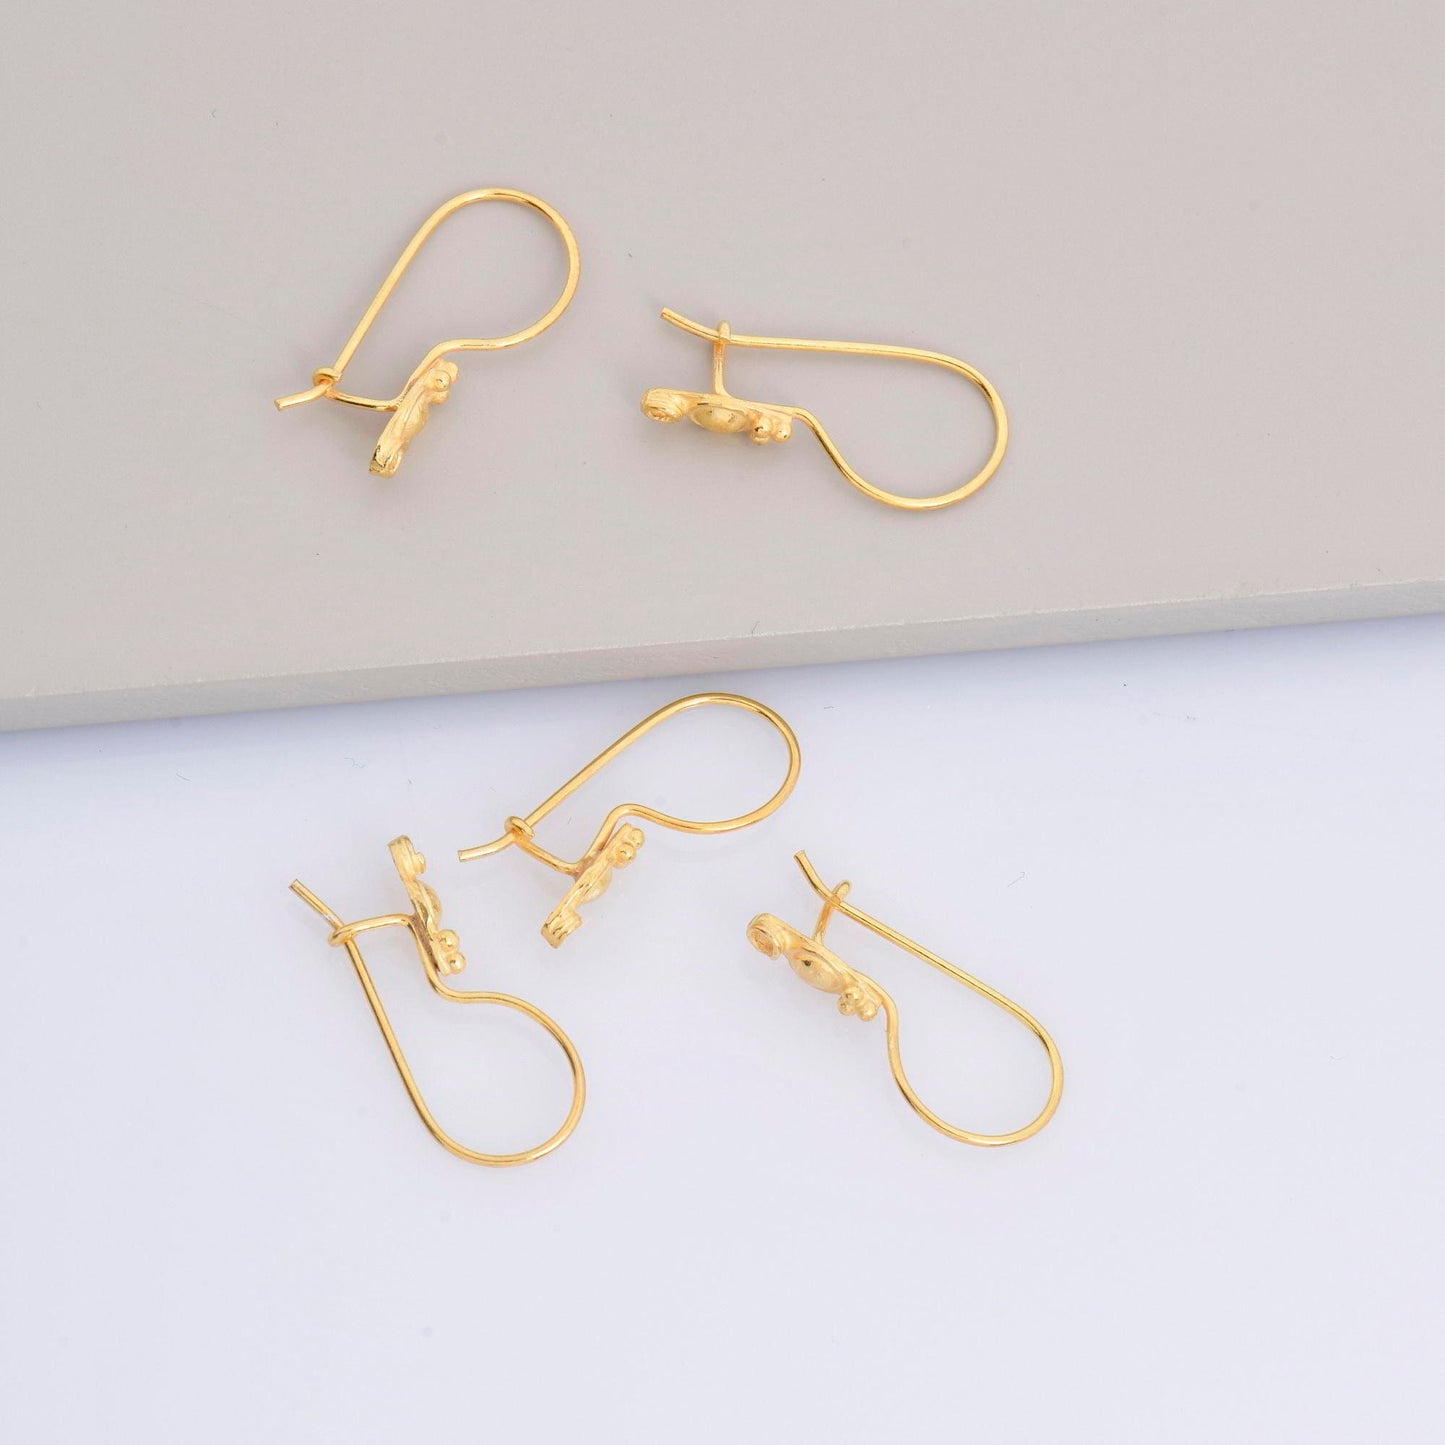 24K Gold Vermeil Ear Wires, Sterling Silver Earring Hooks in 24K Gold, Flower Ear Wires, Earrings Making Supply, Jewelry Findings, M42/VM42